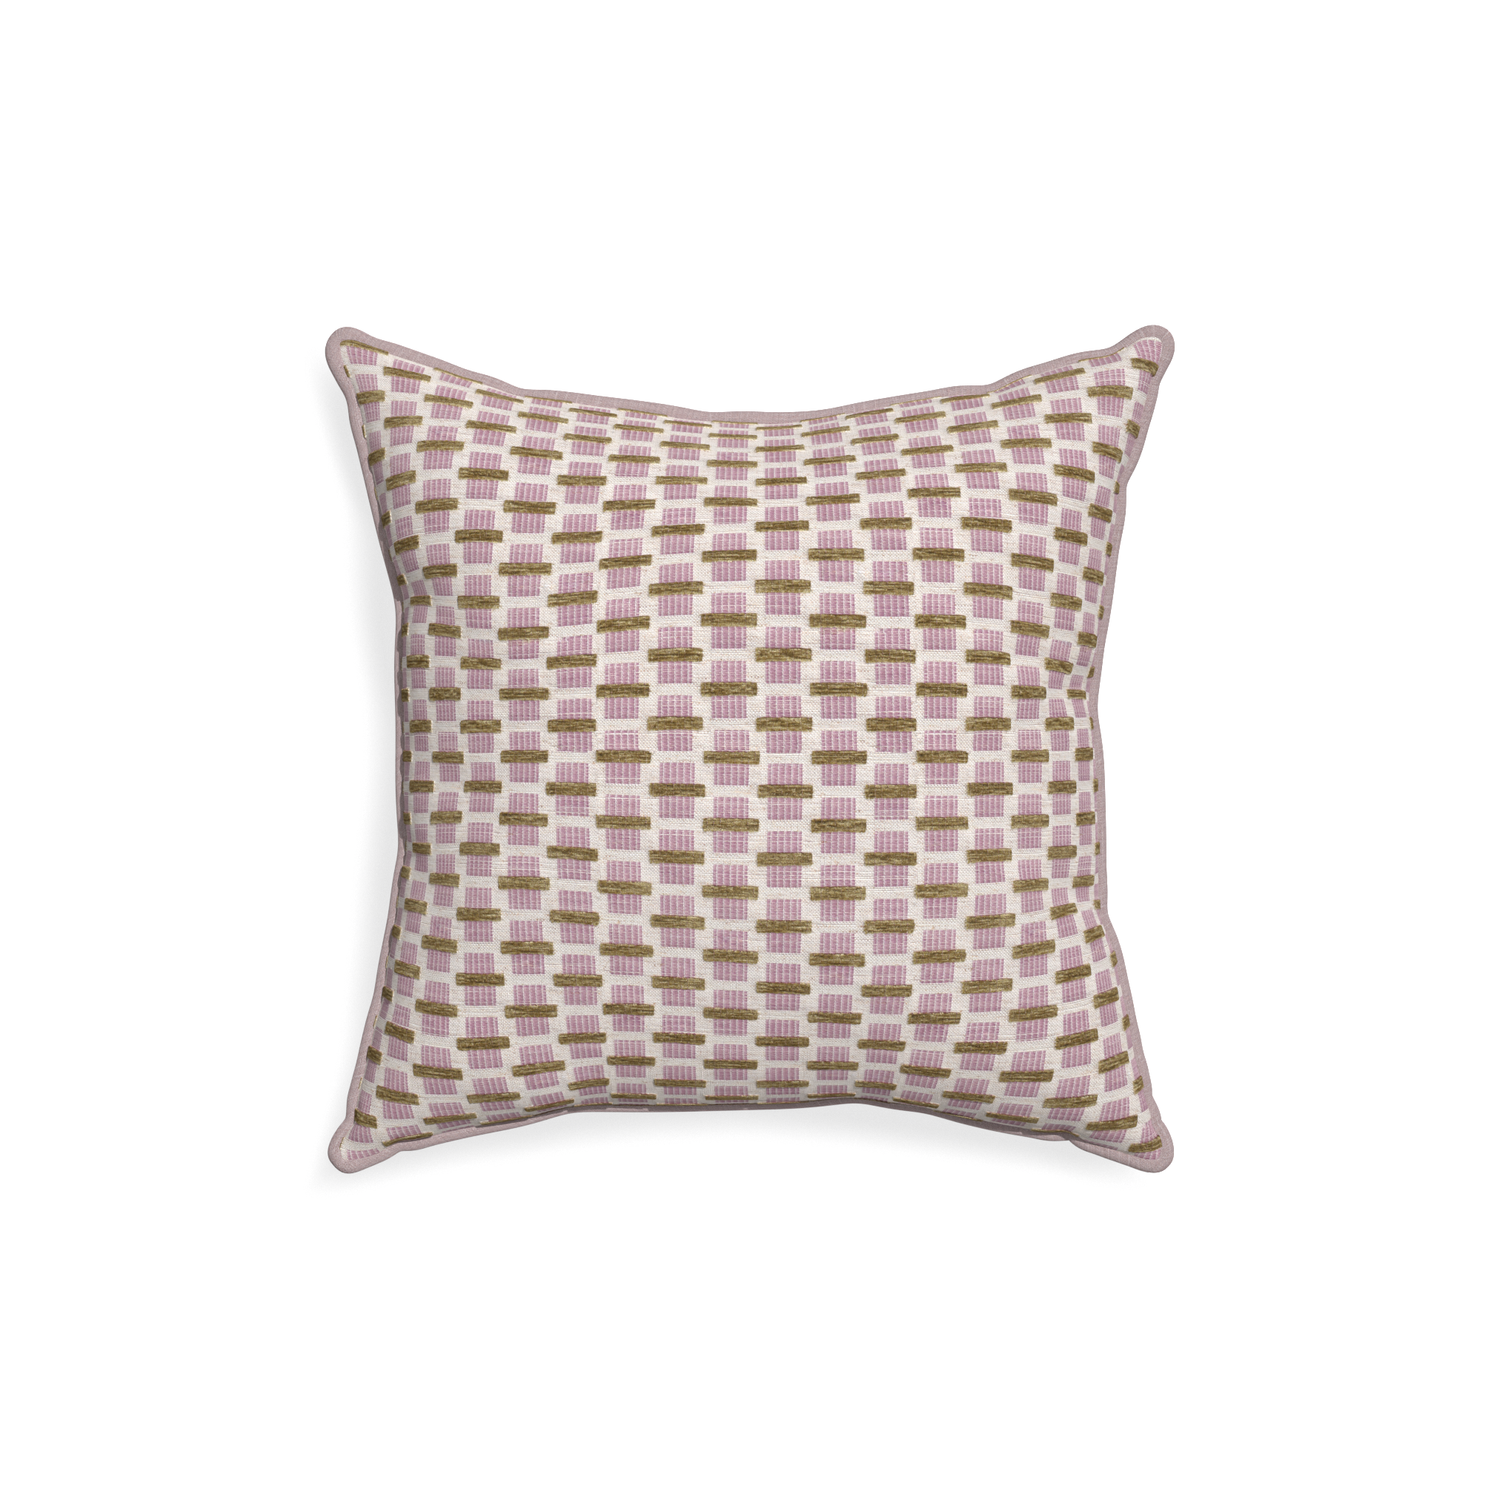 18-square willow orchid custom pink geometric chenillepillow with orchid piping on white background